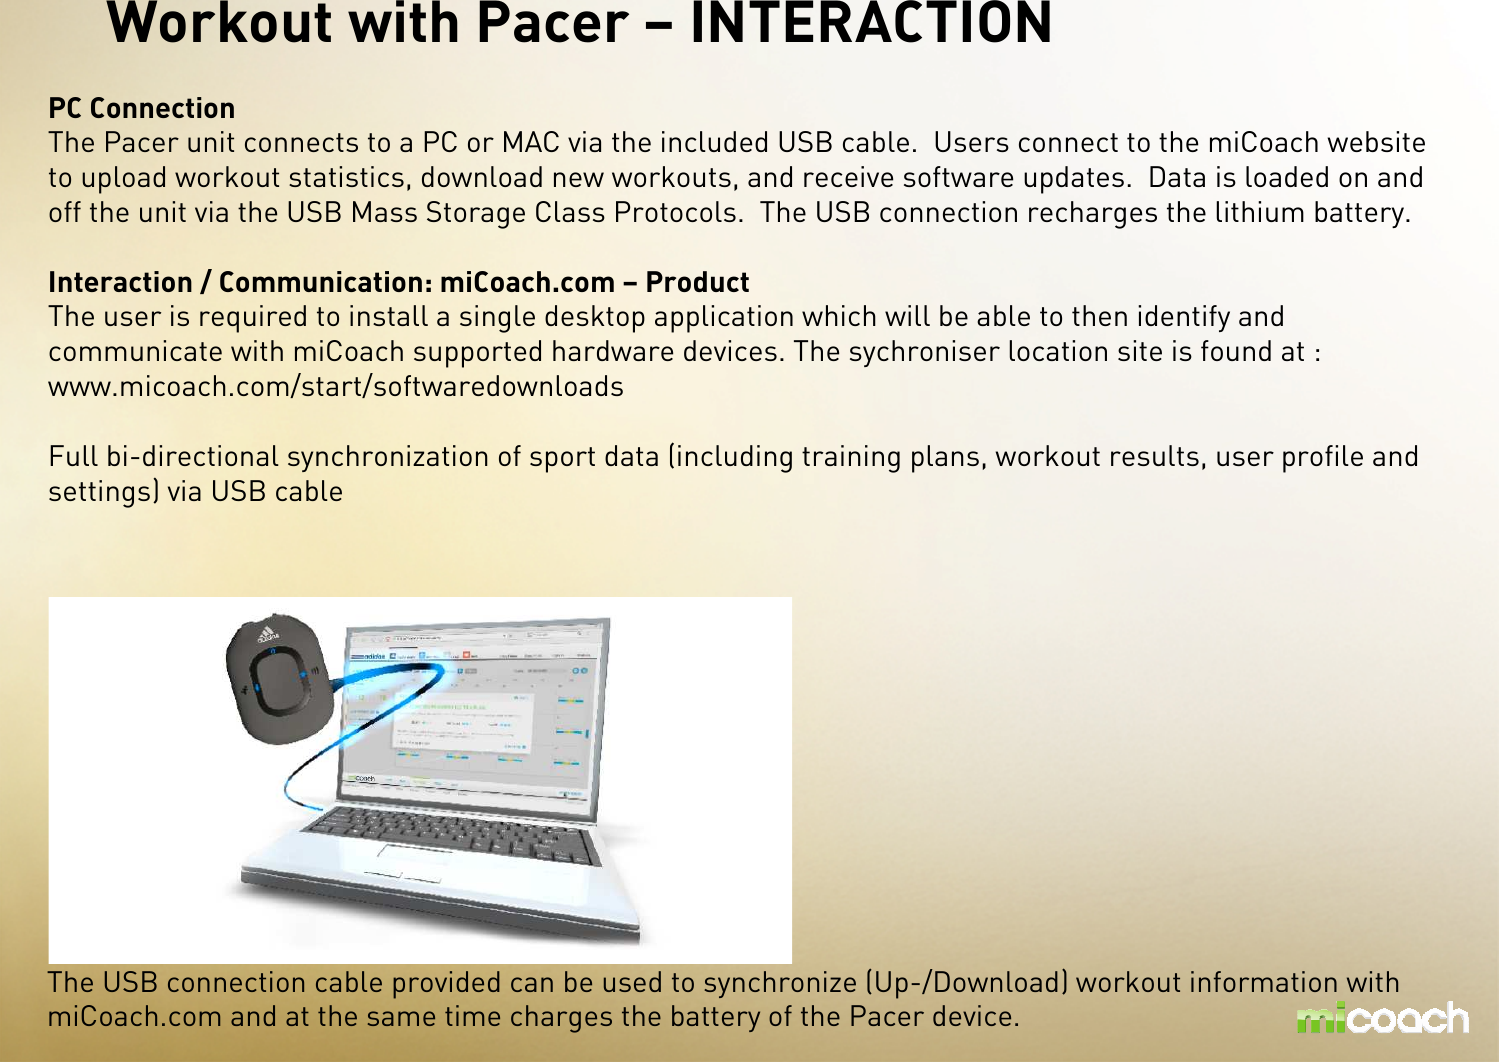 Workout with Pacer – INTERACTION PC ConnectionThe Pacer unit connects to a PC or MAC via the included USB cable.  Users connect to the miCoach website to upload workout statistics, download new workouts, and receive software updates.  Data is loaded on and off the unit via the USB Mass Storage Class Protocols.  The USB connection recharges the lithium battery.Interaction / Communication: miCoach.com – ProductThe user is required to install a single desktop application which will be able to then identify and communicate with miCoach supported hardware devices. The sychroniser location site is found at : www.micoach.com/start/softwaredownloadsFull bi-directional synchronization of sport data (including training plans, workout results, user profile and settings) via USB cableThe USB connection cable provided can be used to synchronize (Up-/Download) workout information withmiCoach.com and at the same time charges the battery of the Pacer device.